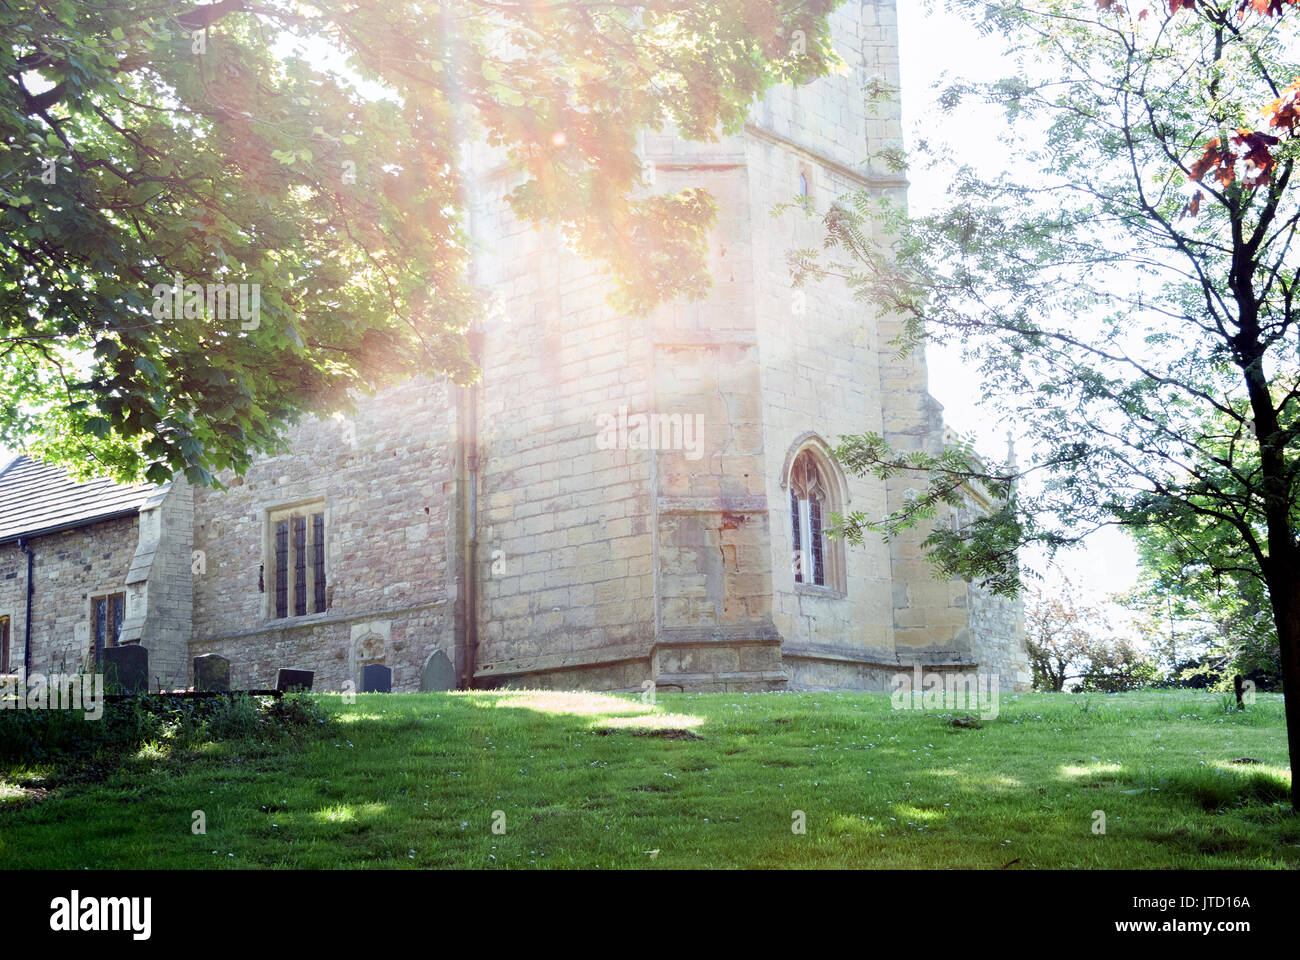 England, Church, Place of Worship, Religion, Holy Place, Trees, Light Flare, Sunshine, Cemetery, Burial Ground, Graves, Churchyard, Holy Place, Faith Stock Photo